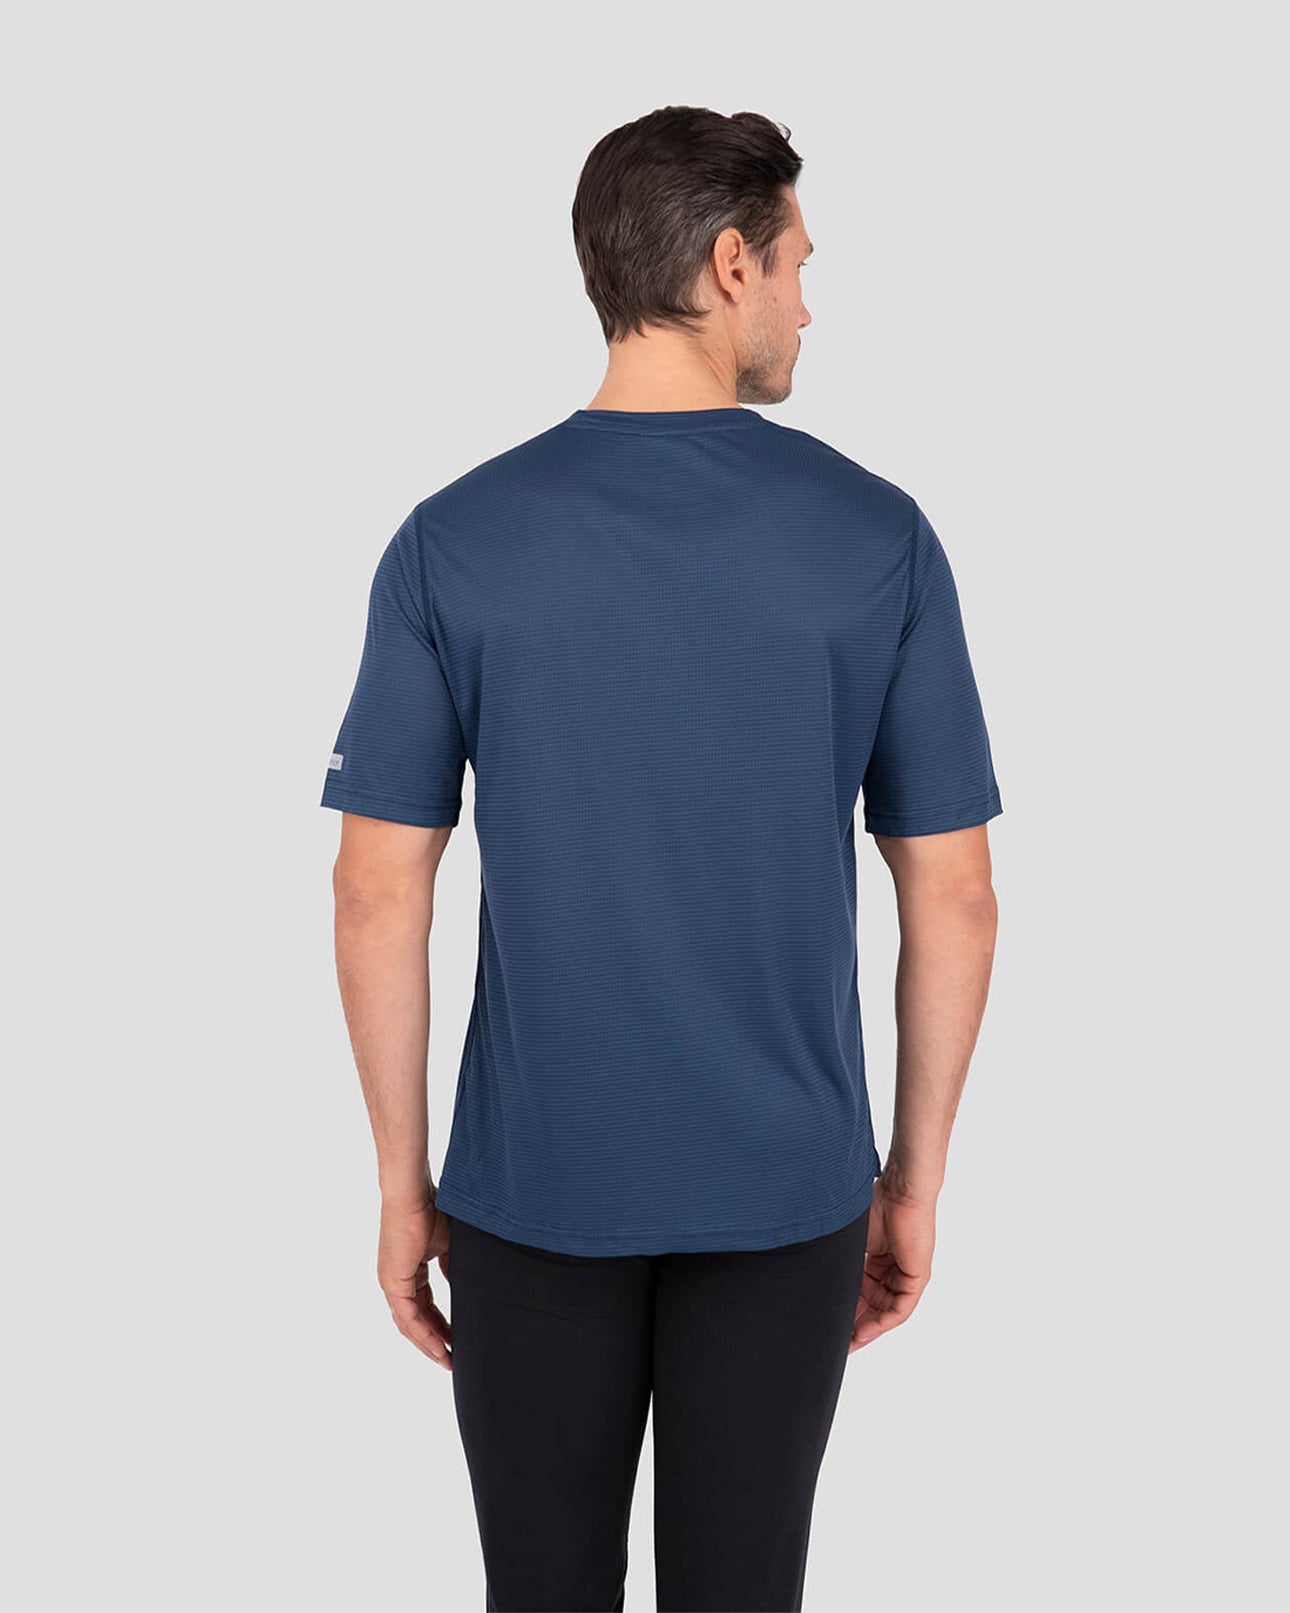 Men's Transport® Lightweight Recycled Polyester Thermal Short-Sleeve Shirt | Color: Twilight